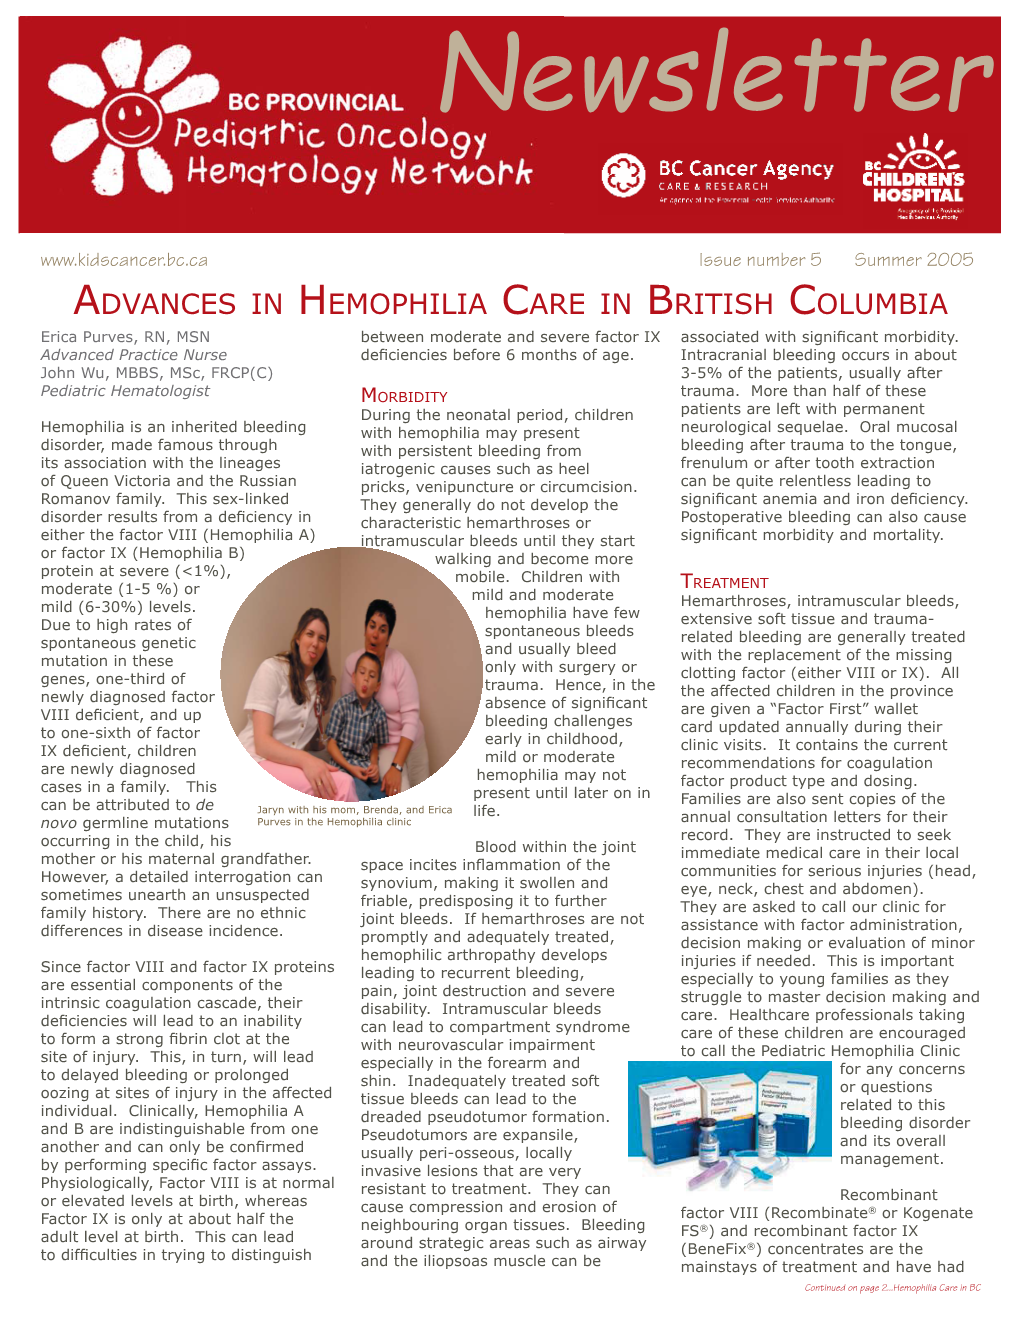 Summer 2005 ADVANCES in HEMOPHILIA CARE in BRITISH COLUMBIA Erica Purves, RN, MSN Between Moderate and Severe Factor IX Associated with Signiﬁ Cant Morbidity